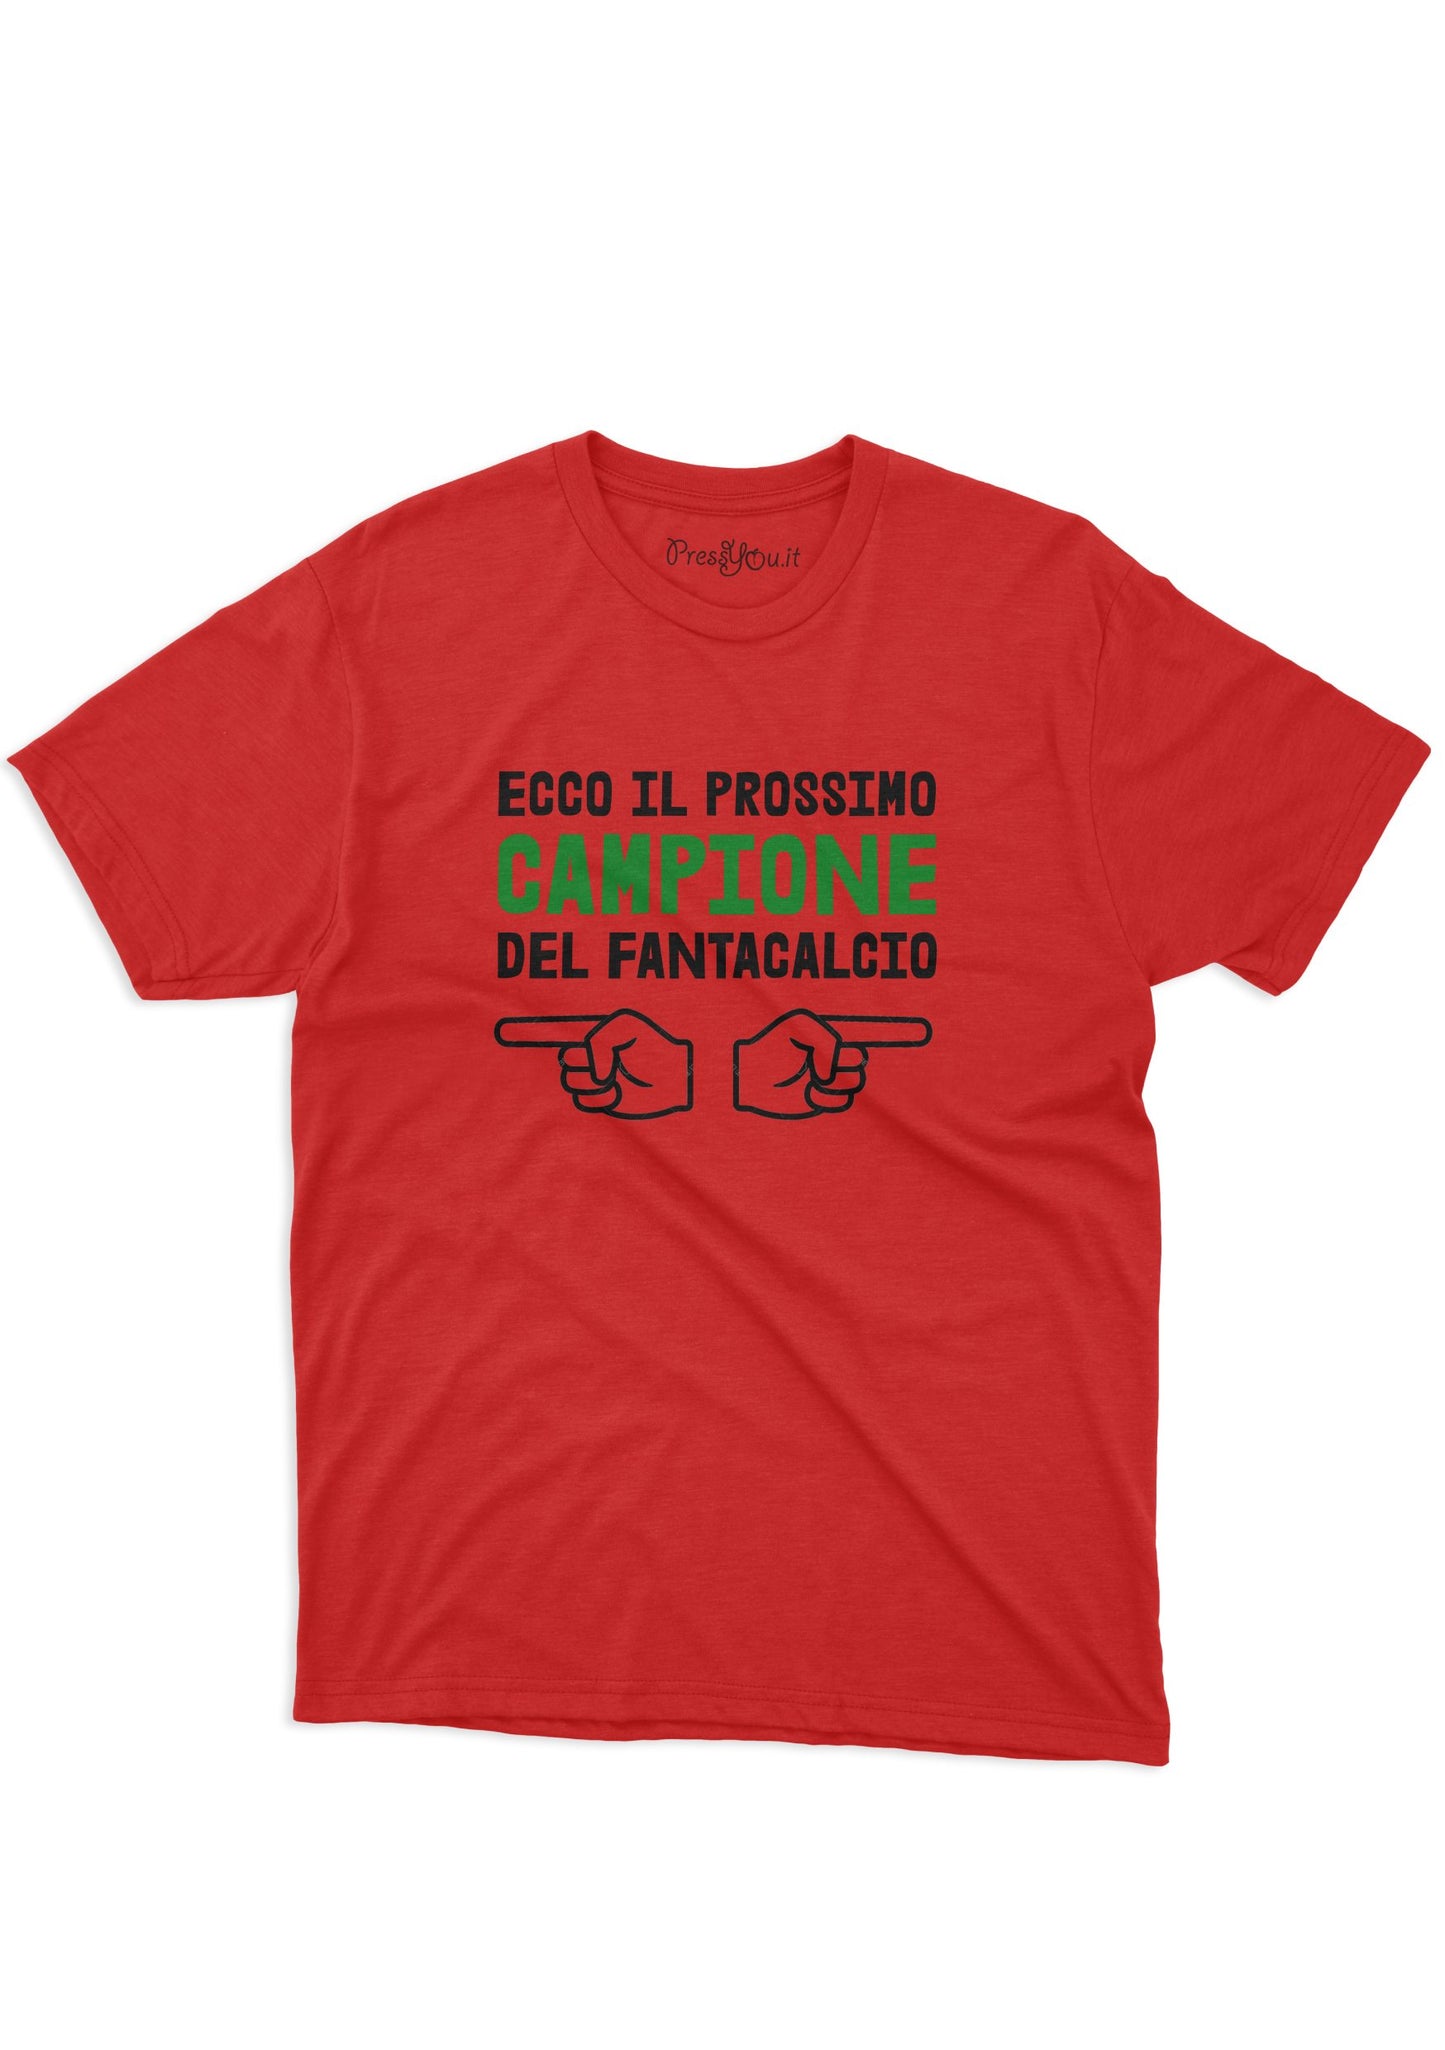 fantasy football t-shirt here is the next winner of fantasy football owl superstition fun gift idea